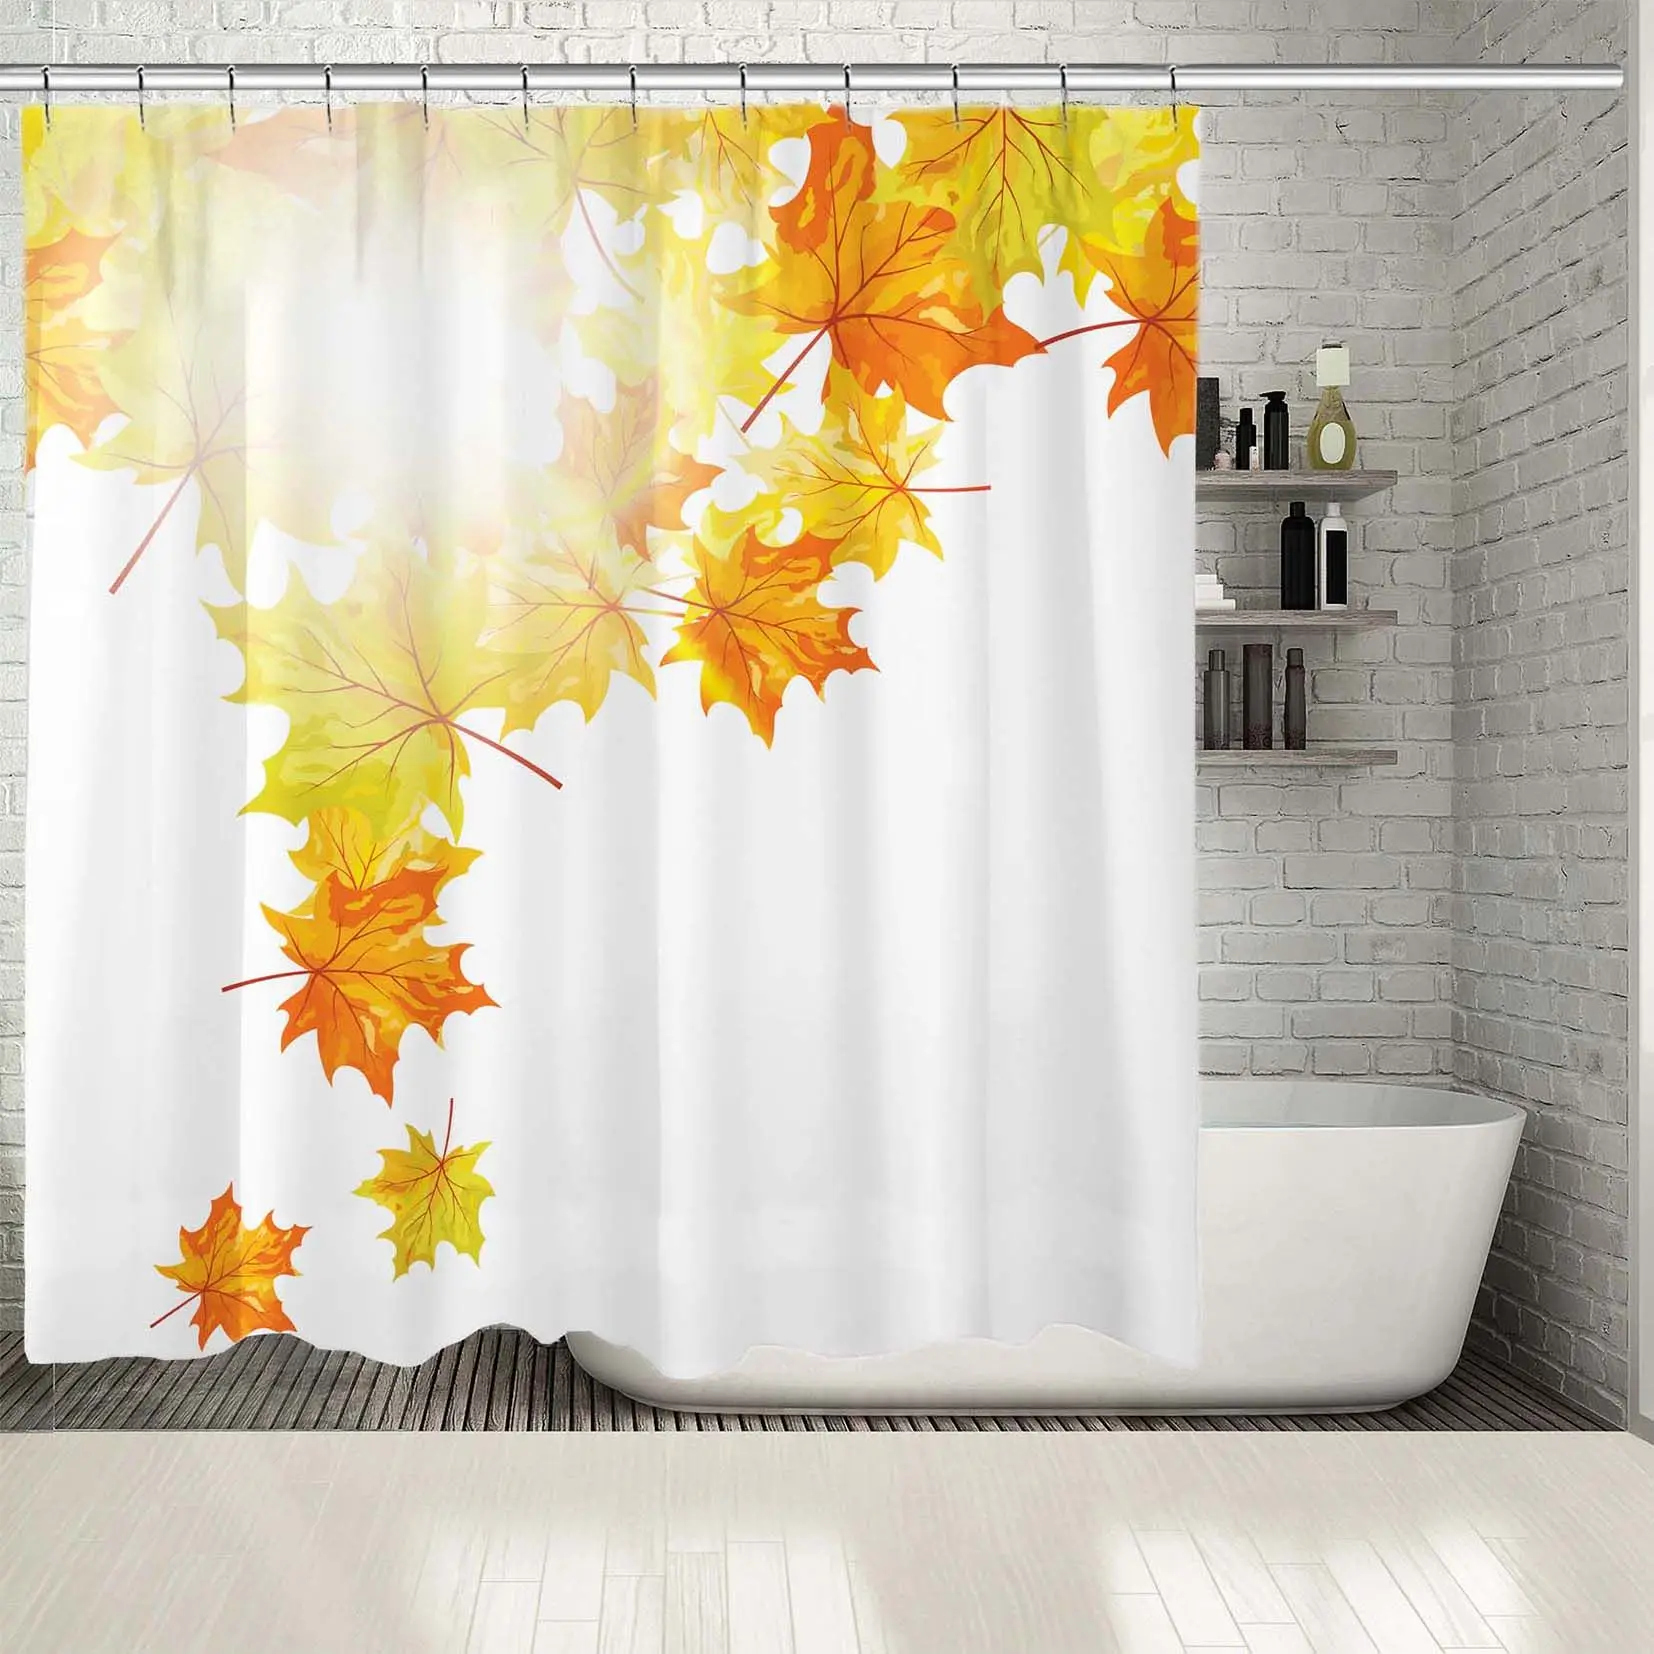 

Shower Curtain Falling Maple Tree Leaves Shining Sun Autumn Day Parking Nature View Printed Yellow Orange White